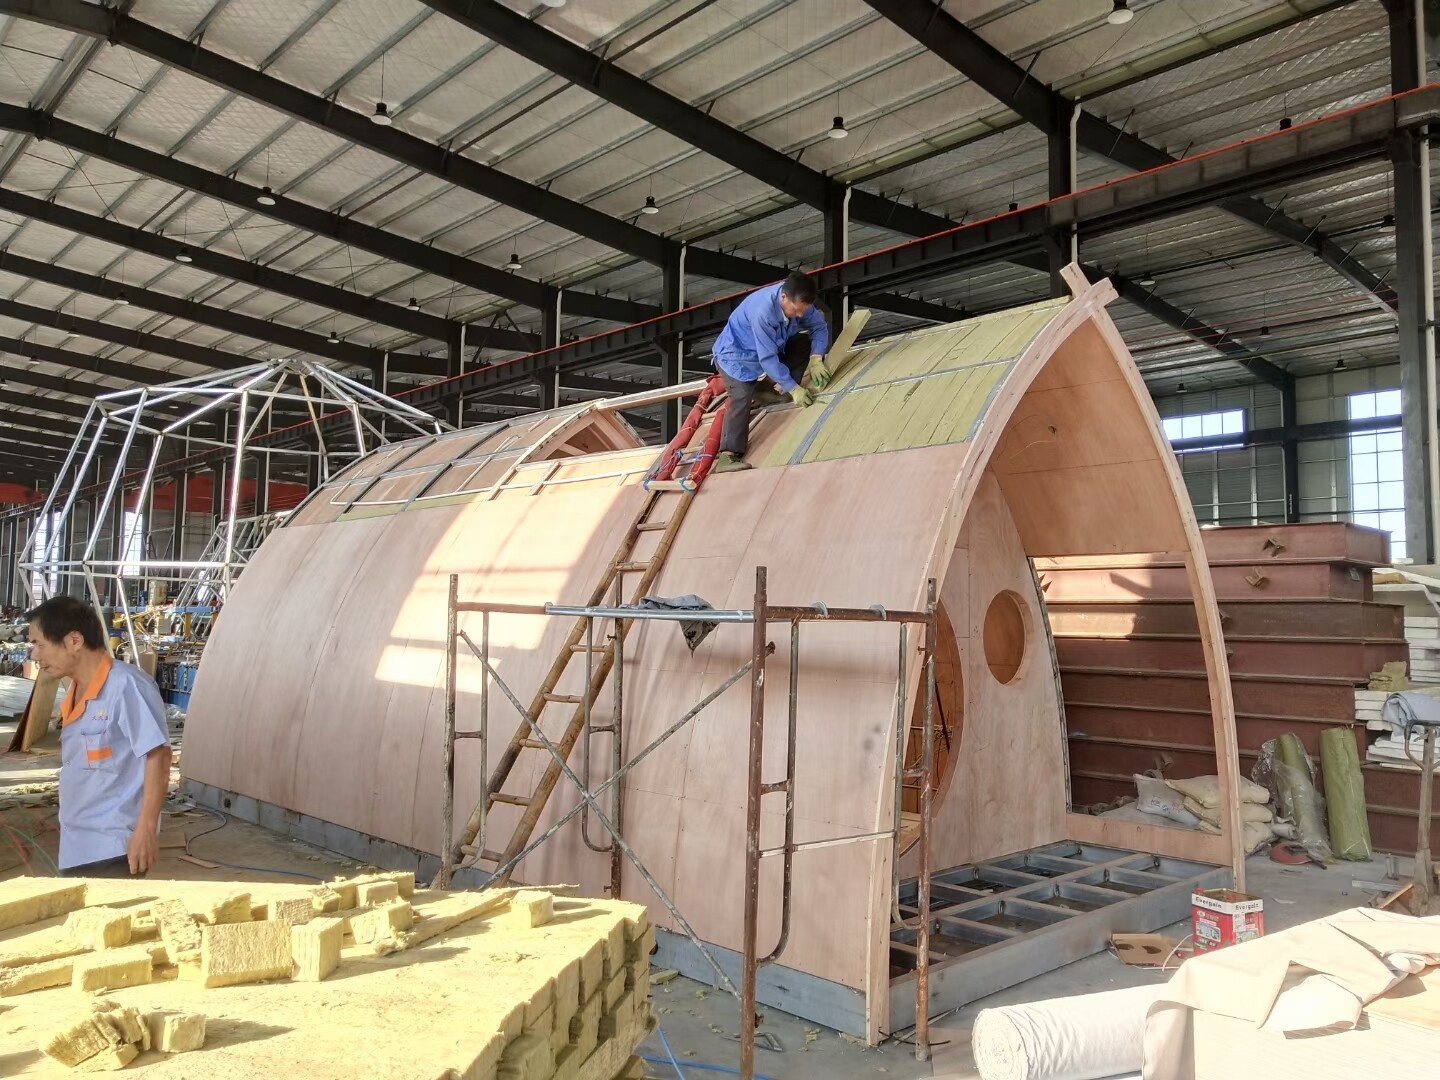 arched roof container company, arched roof container exporter, beach cabin container oem, beach cabin container odm, beach cabin container customize